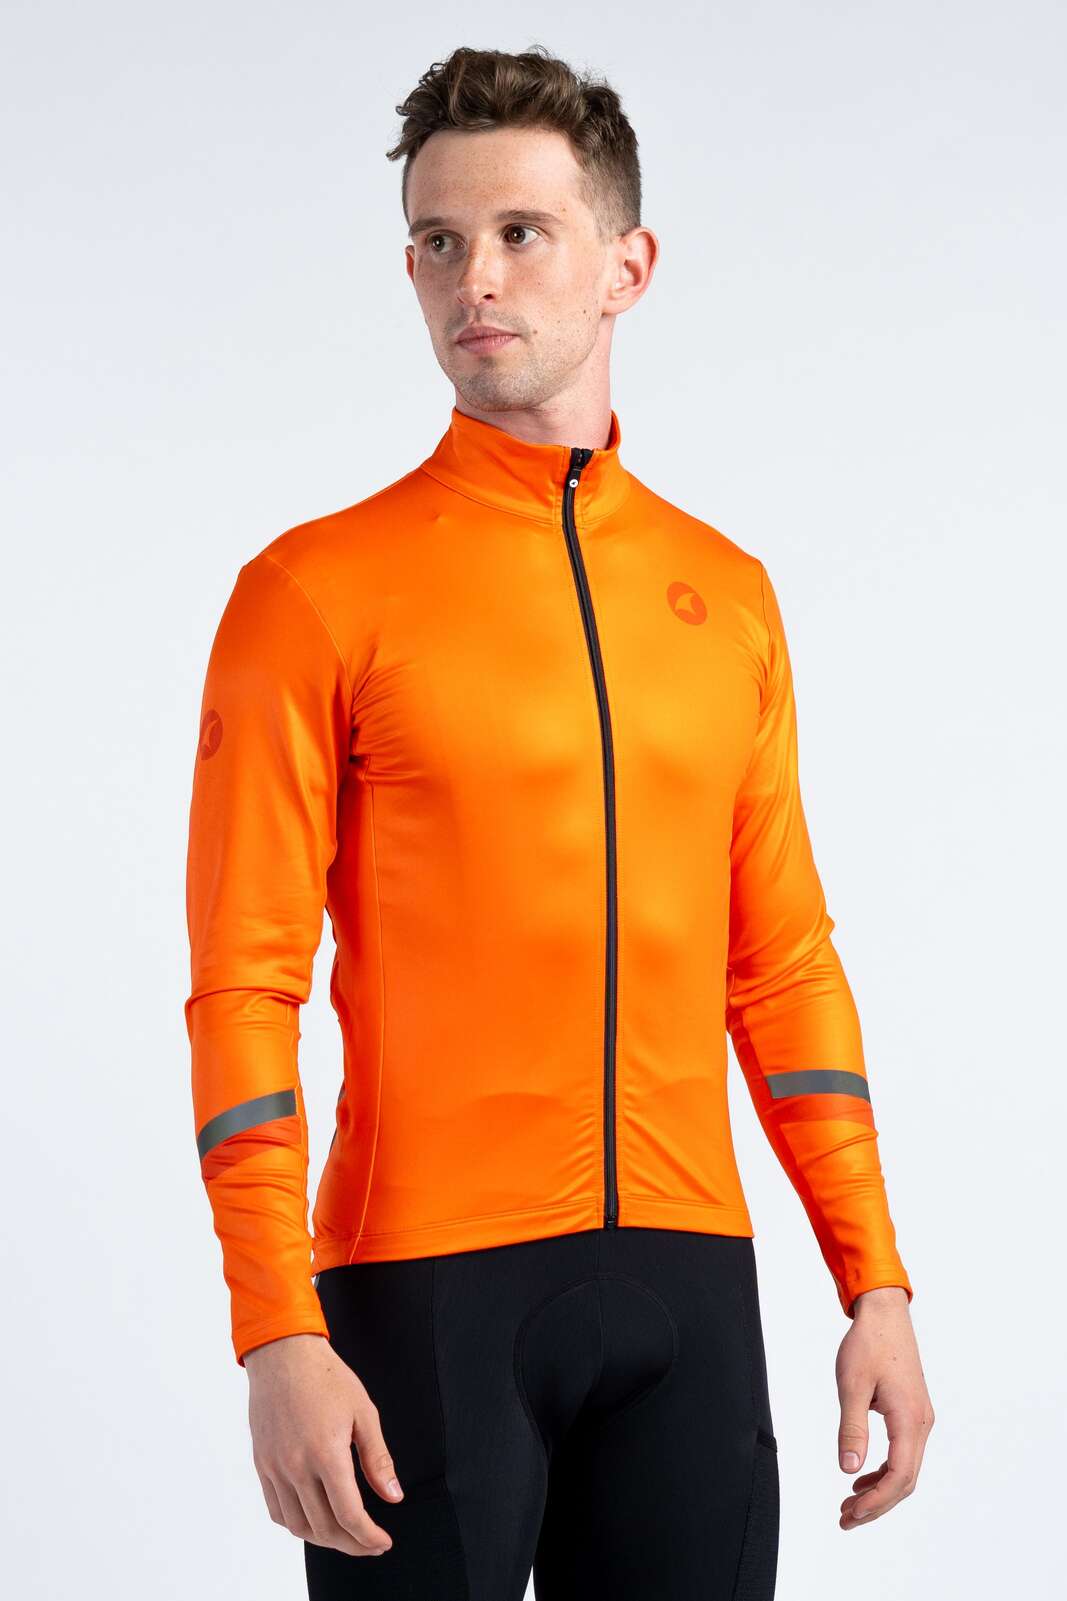 Men's Red/Orange Thermal Cycling Jersey - Front View